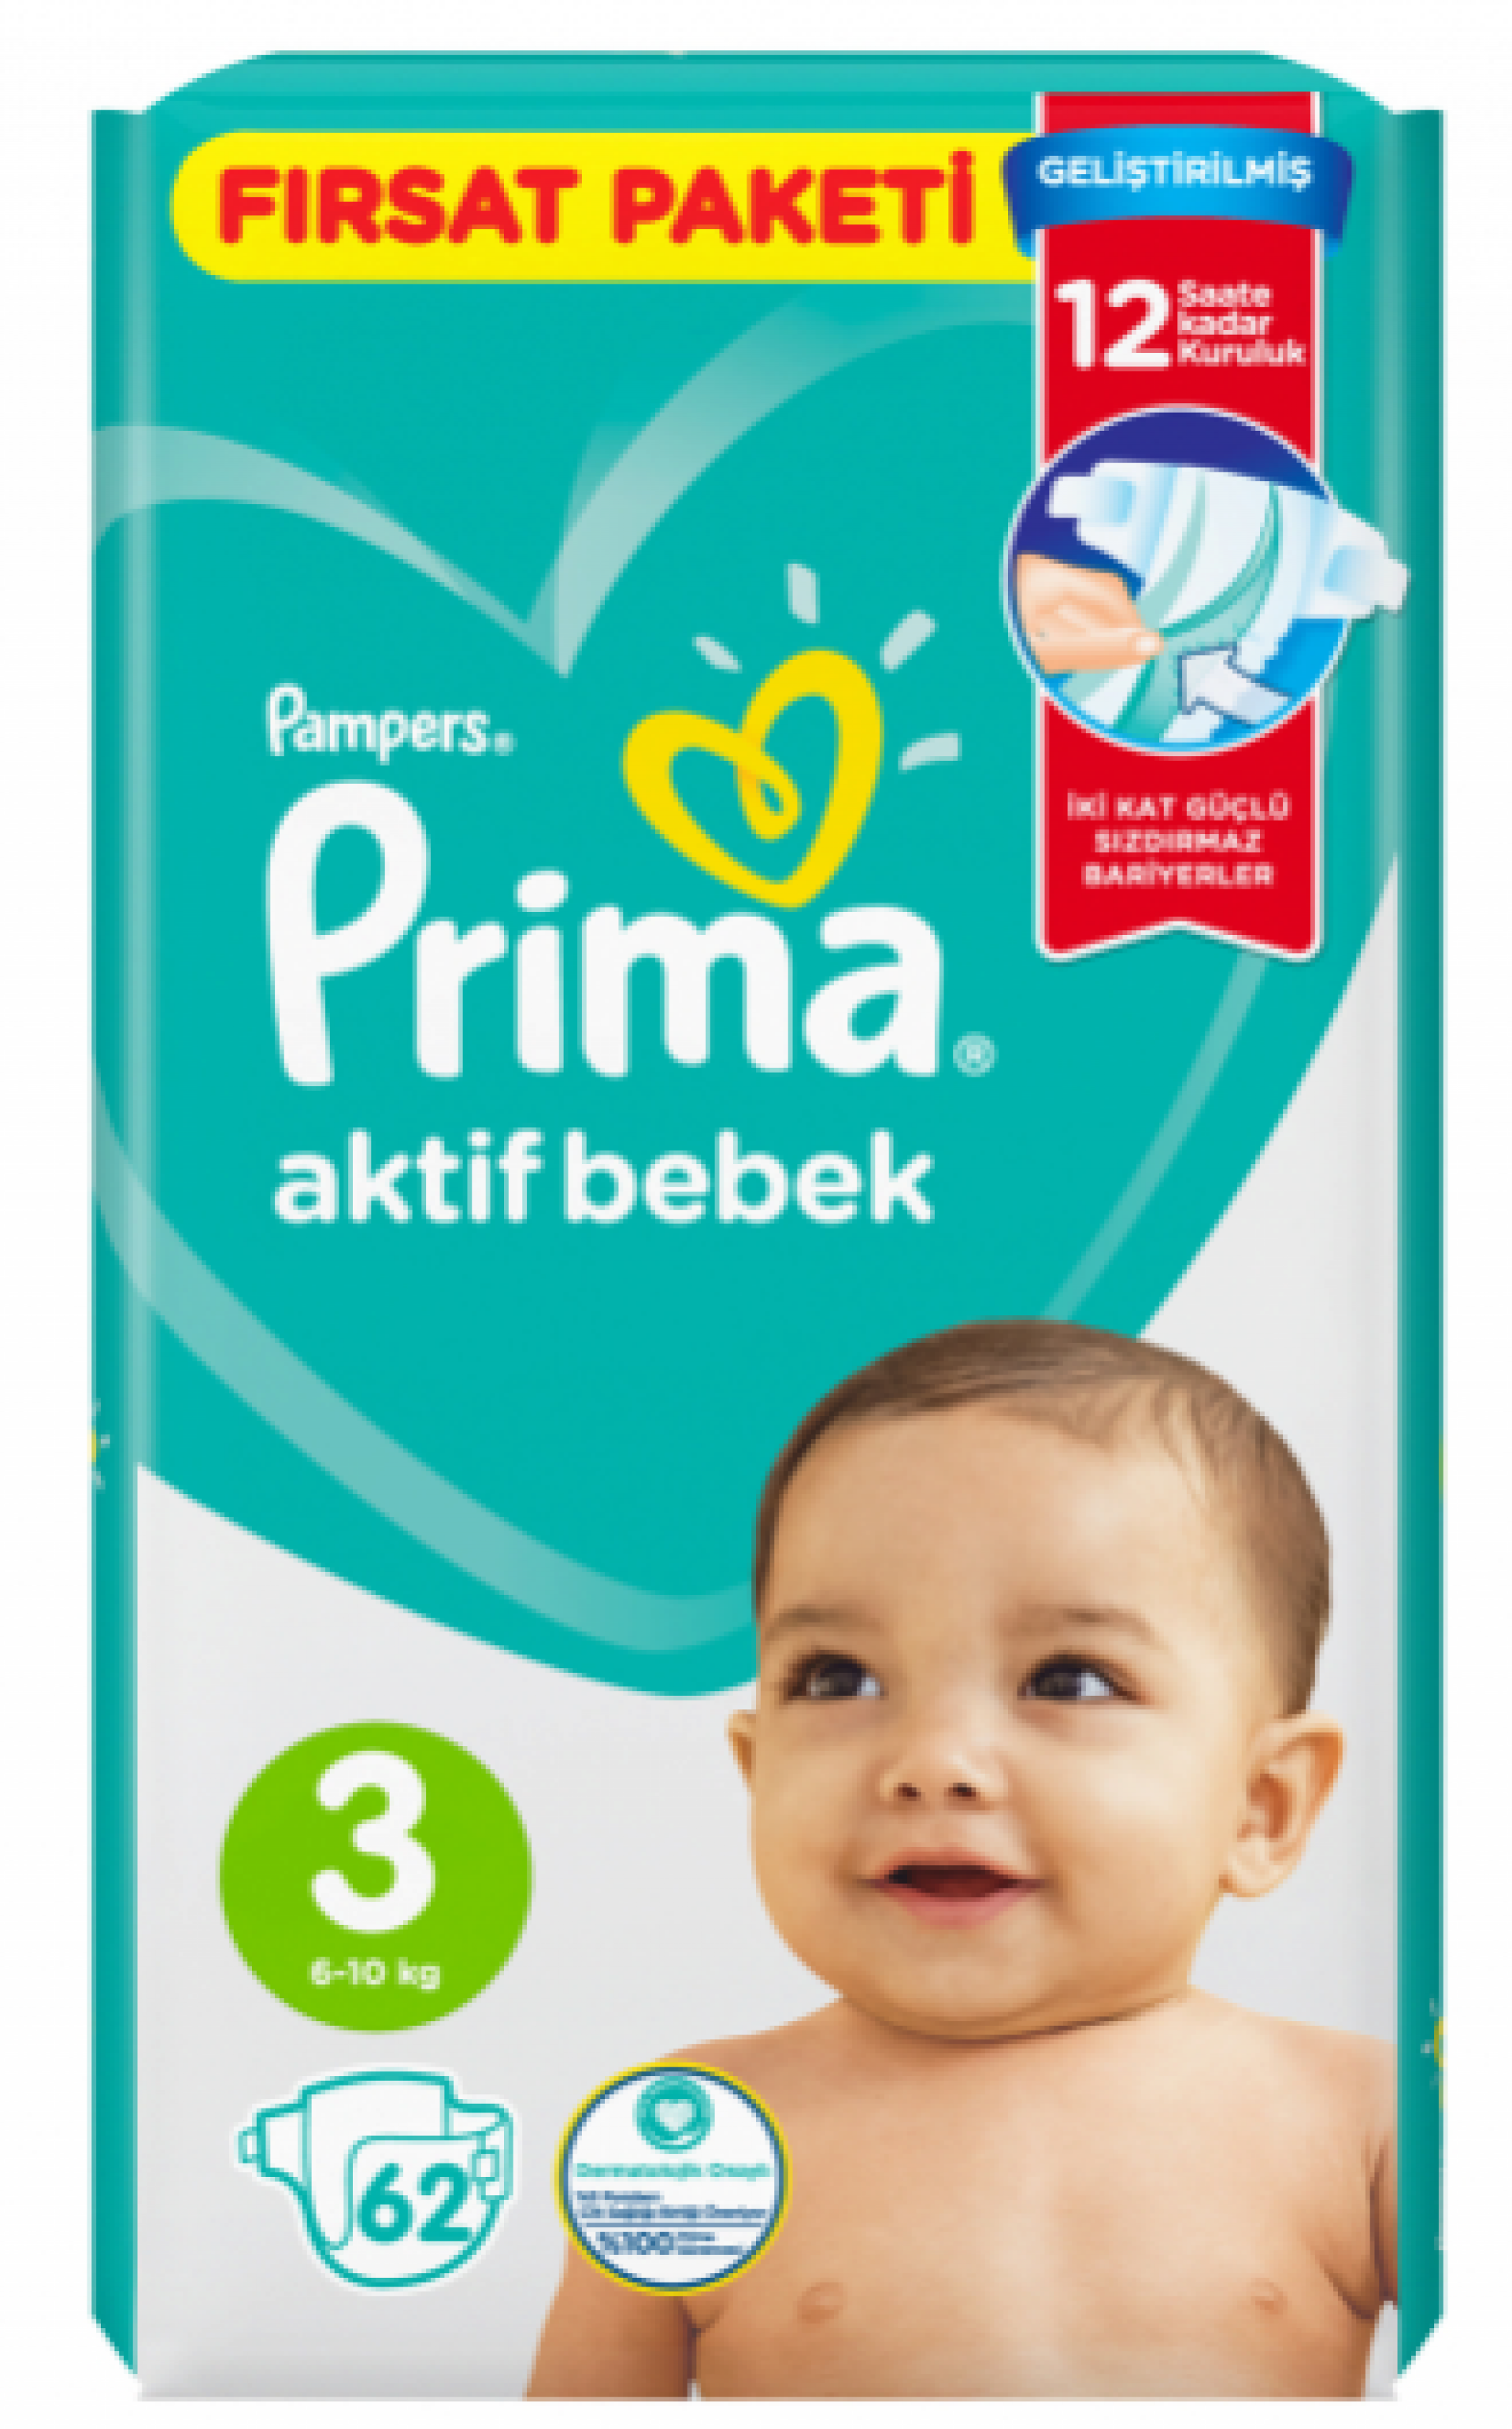 pampers 54 szt